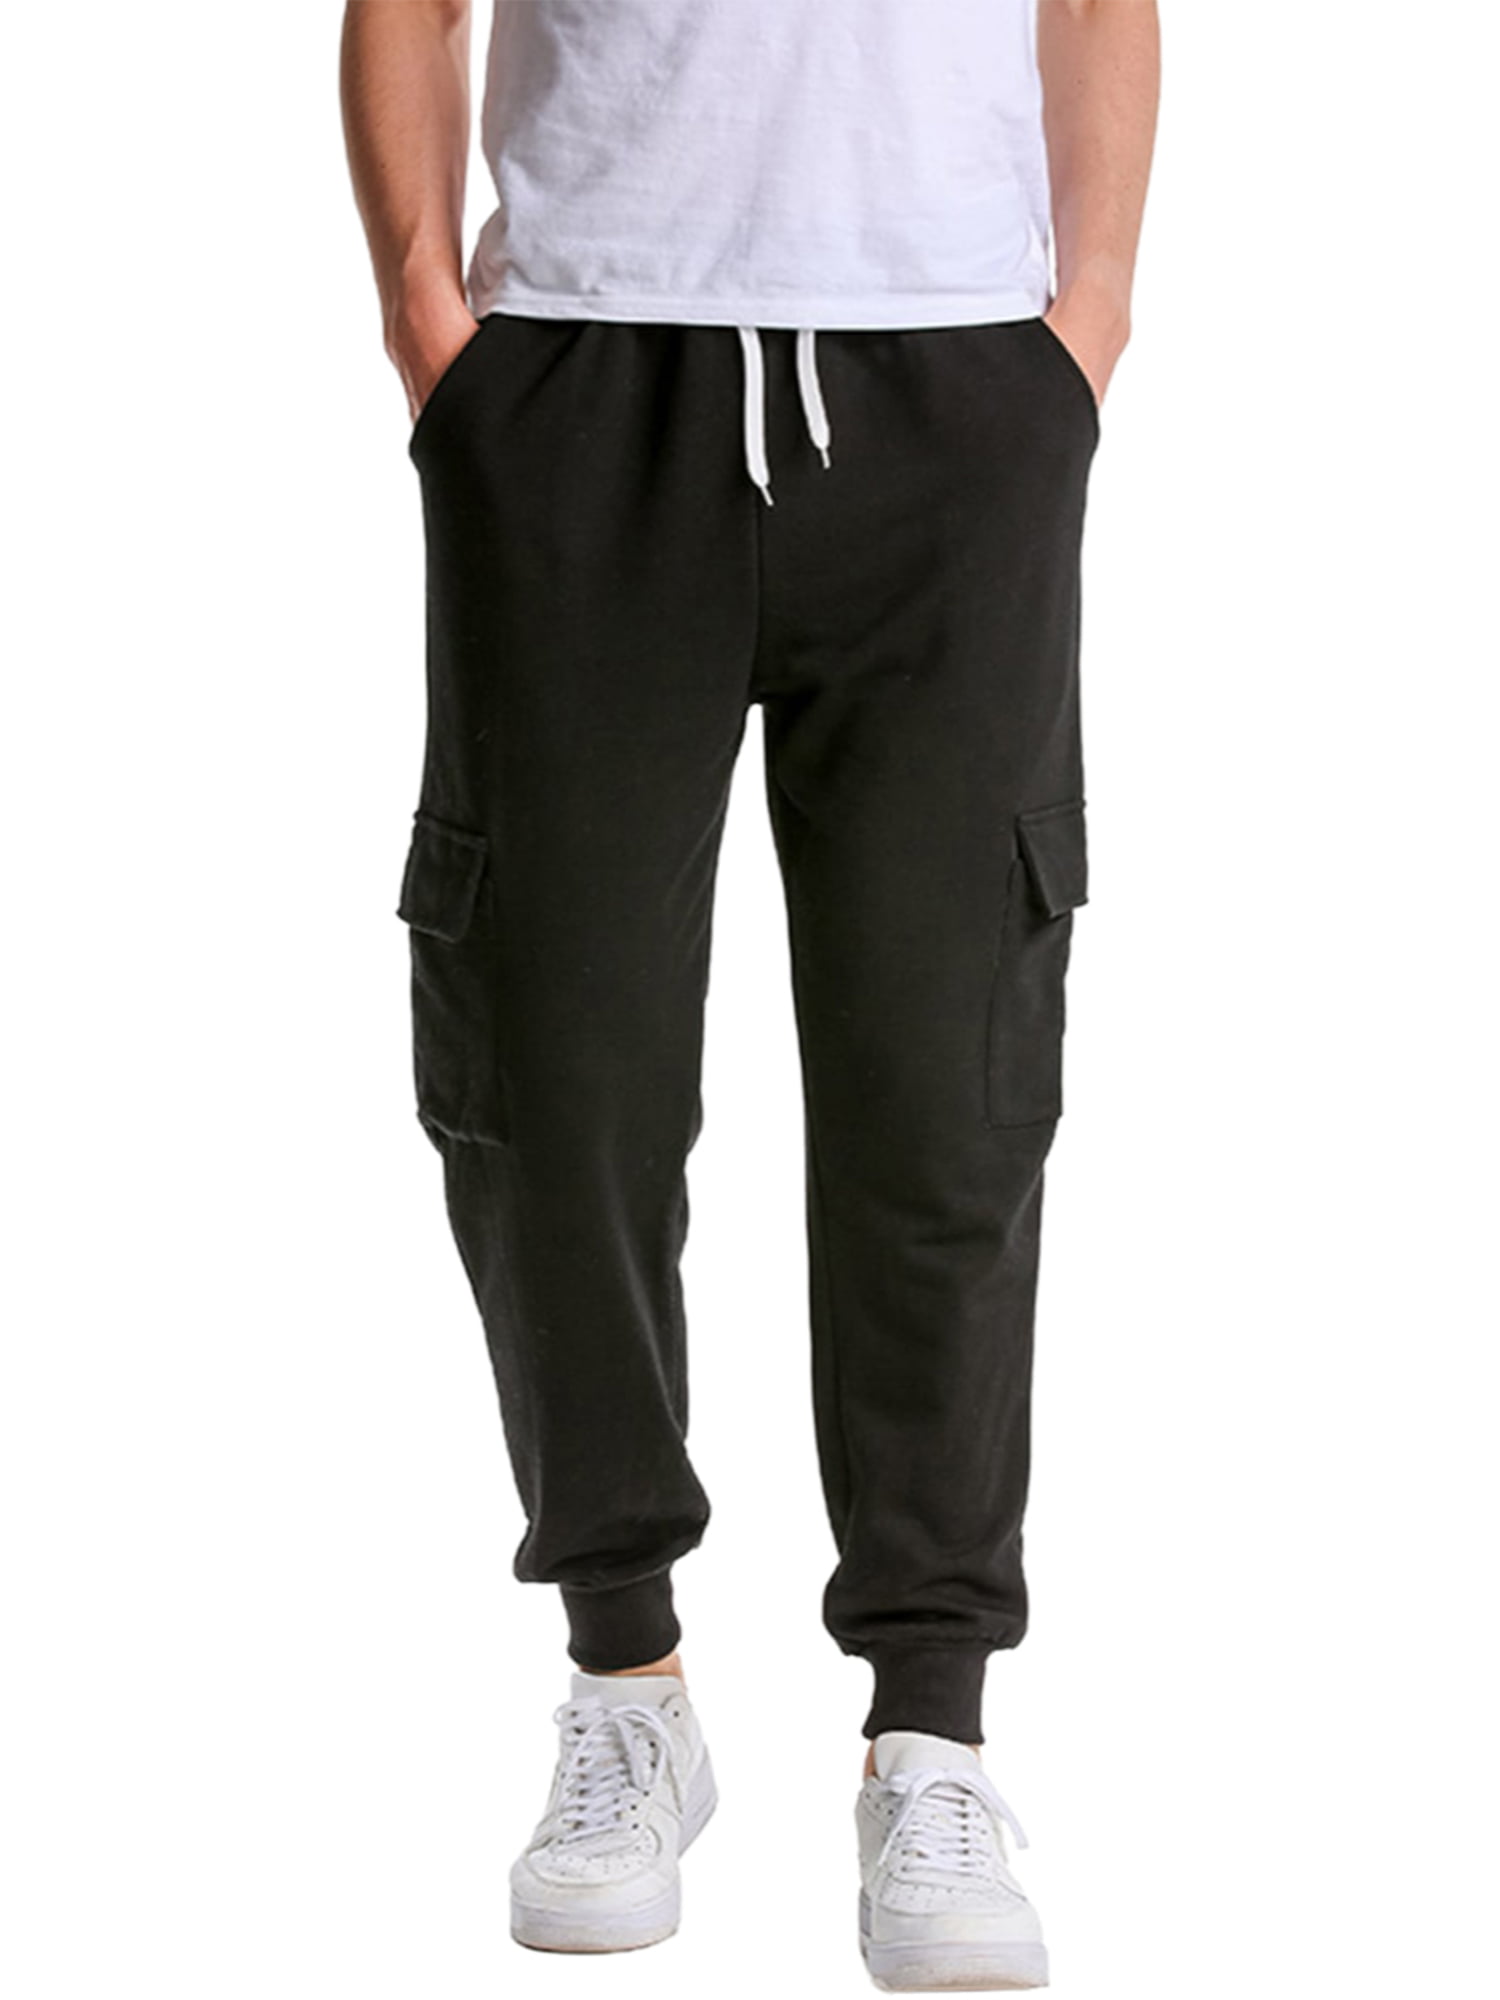 Men's Cargo Sweatpants with Pockets Solid Color Drawstring Athletic Joggers  Pants for Men Classic Casual Slim Fit Pants